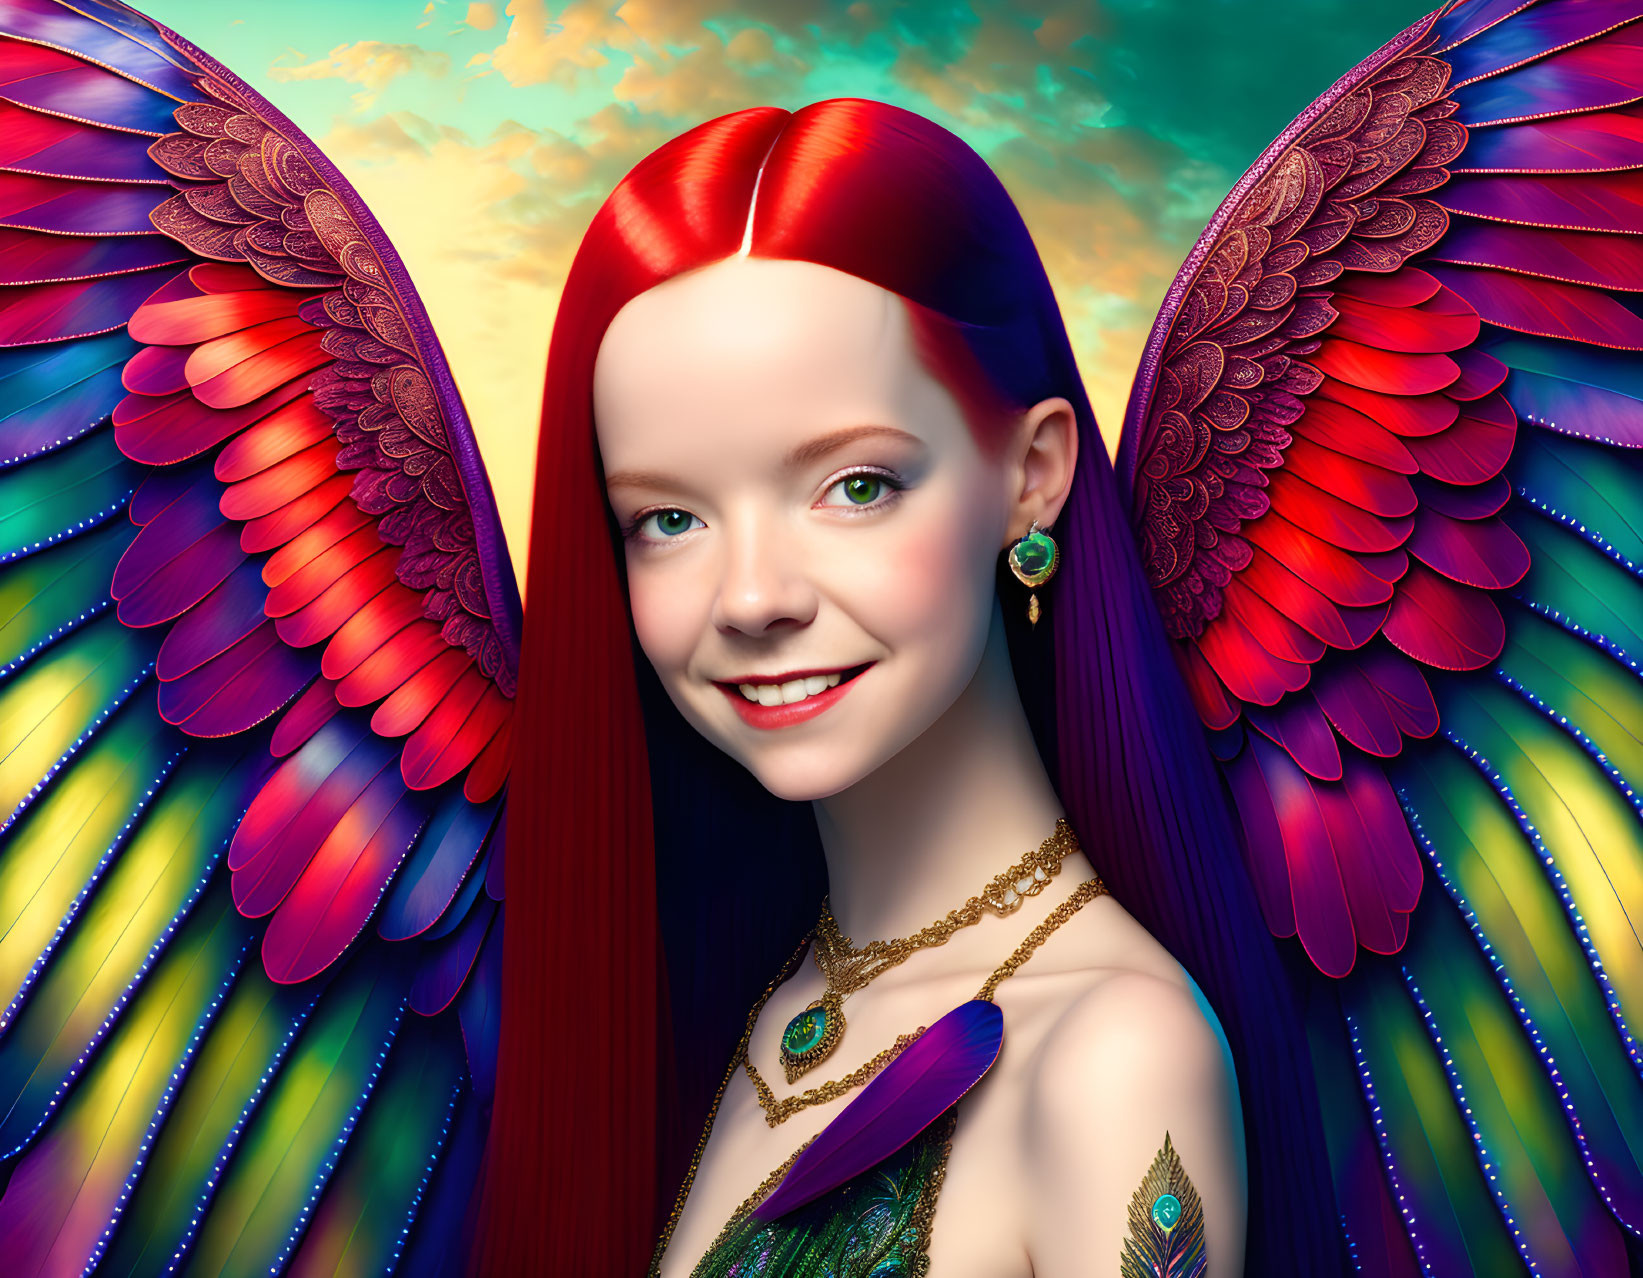 Vibrant red-haired girl with multicolored wings in digital art portrait